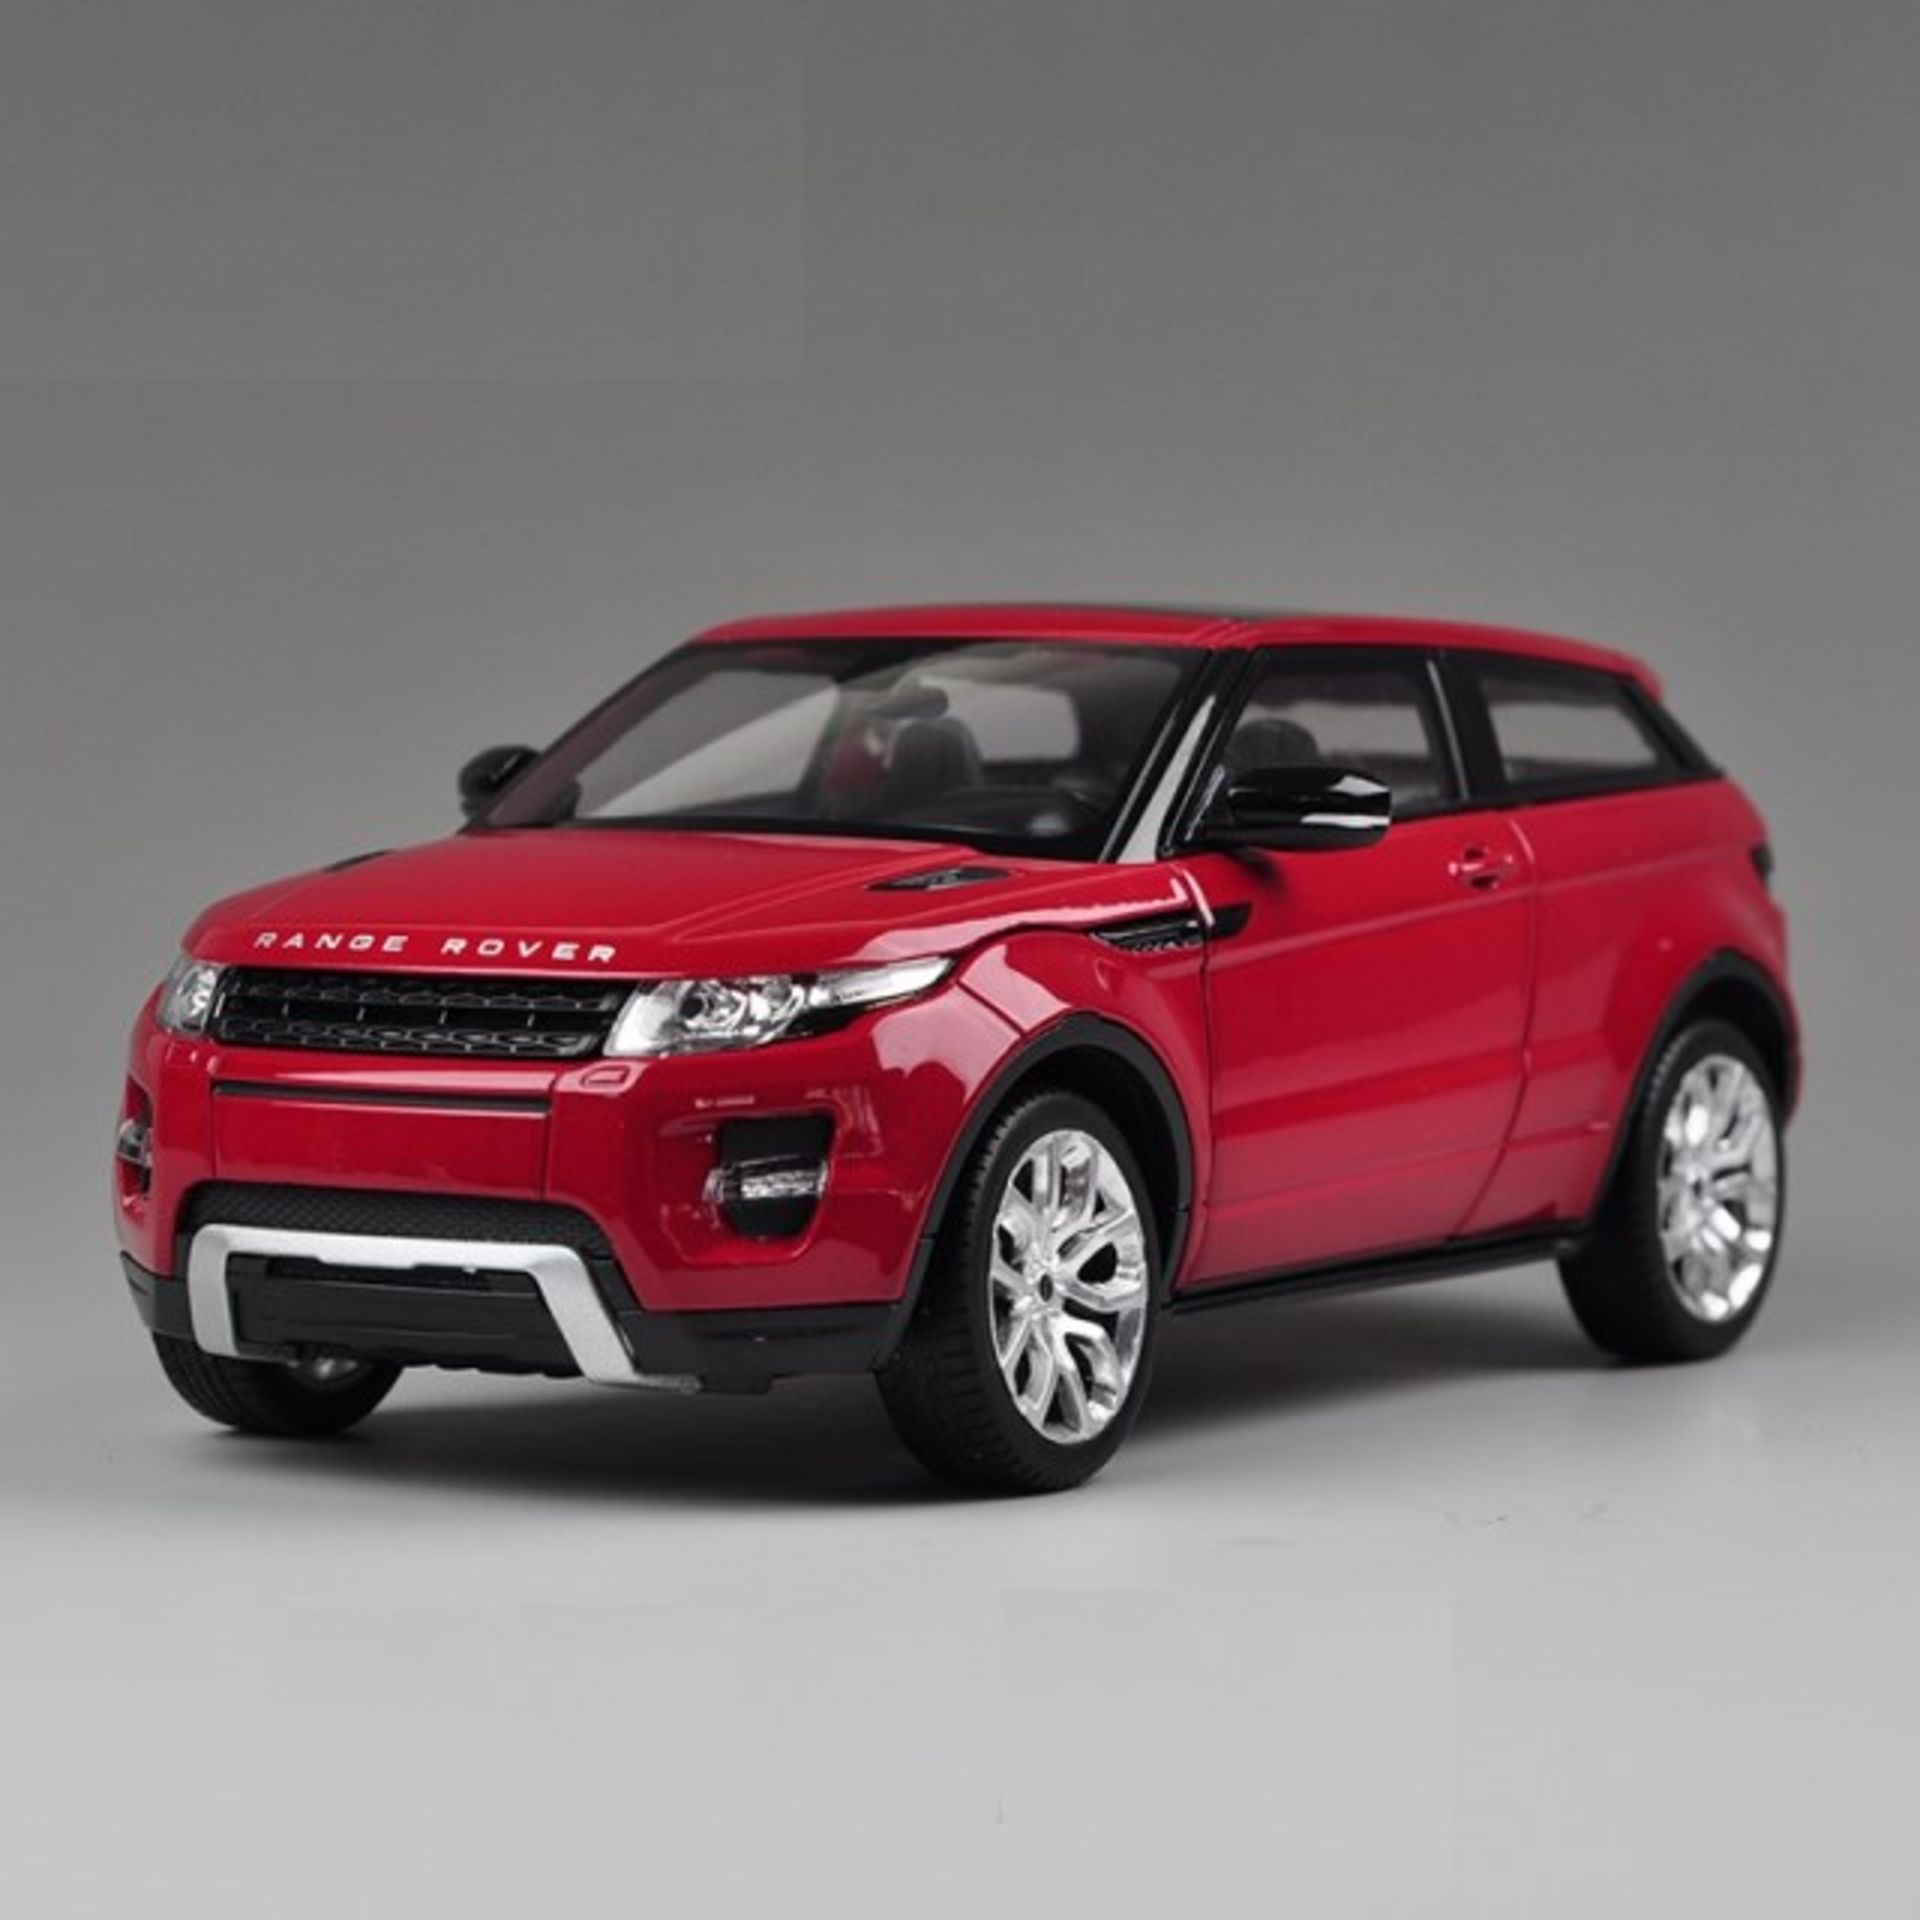 V Brand New Radio Control Range Rover Evoque Officially Licensed Product 1:24 Ebay £24.62 X 2 YOUR